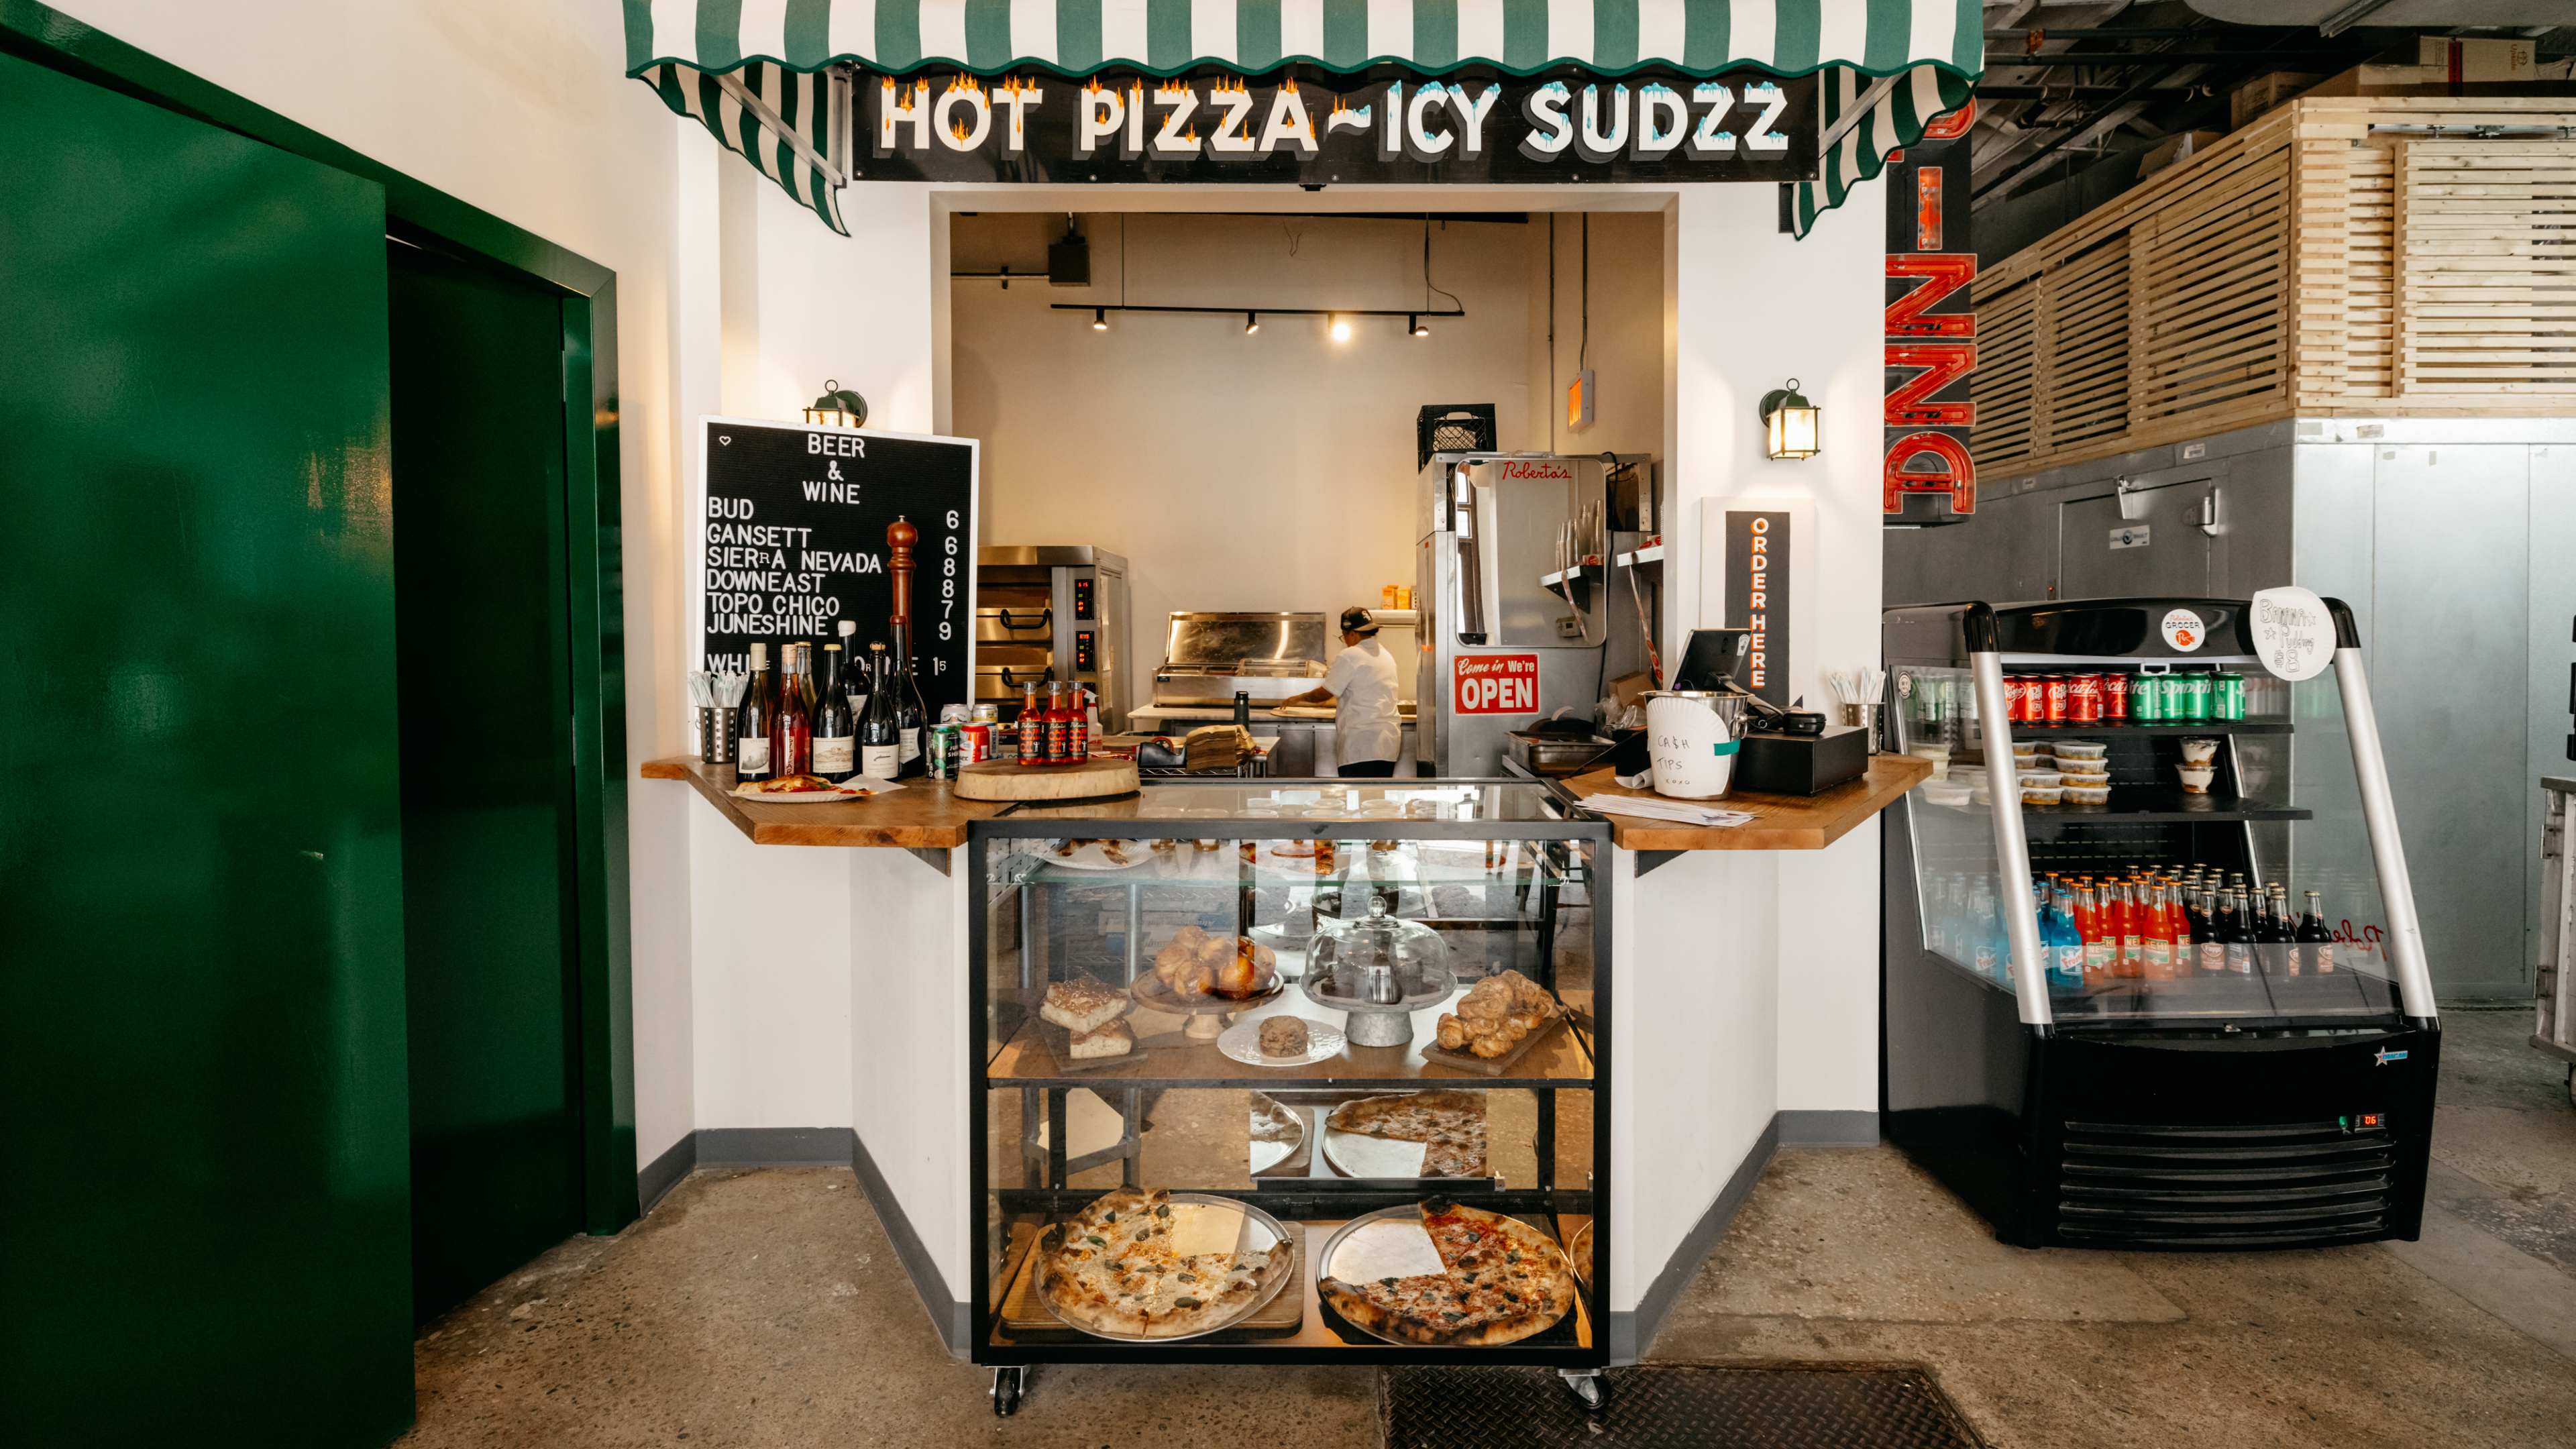 A counter with a green awning and a glass case with baked goods inside R Slice pizza.